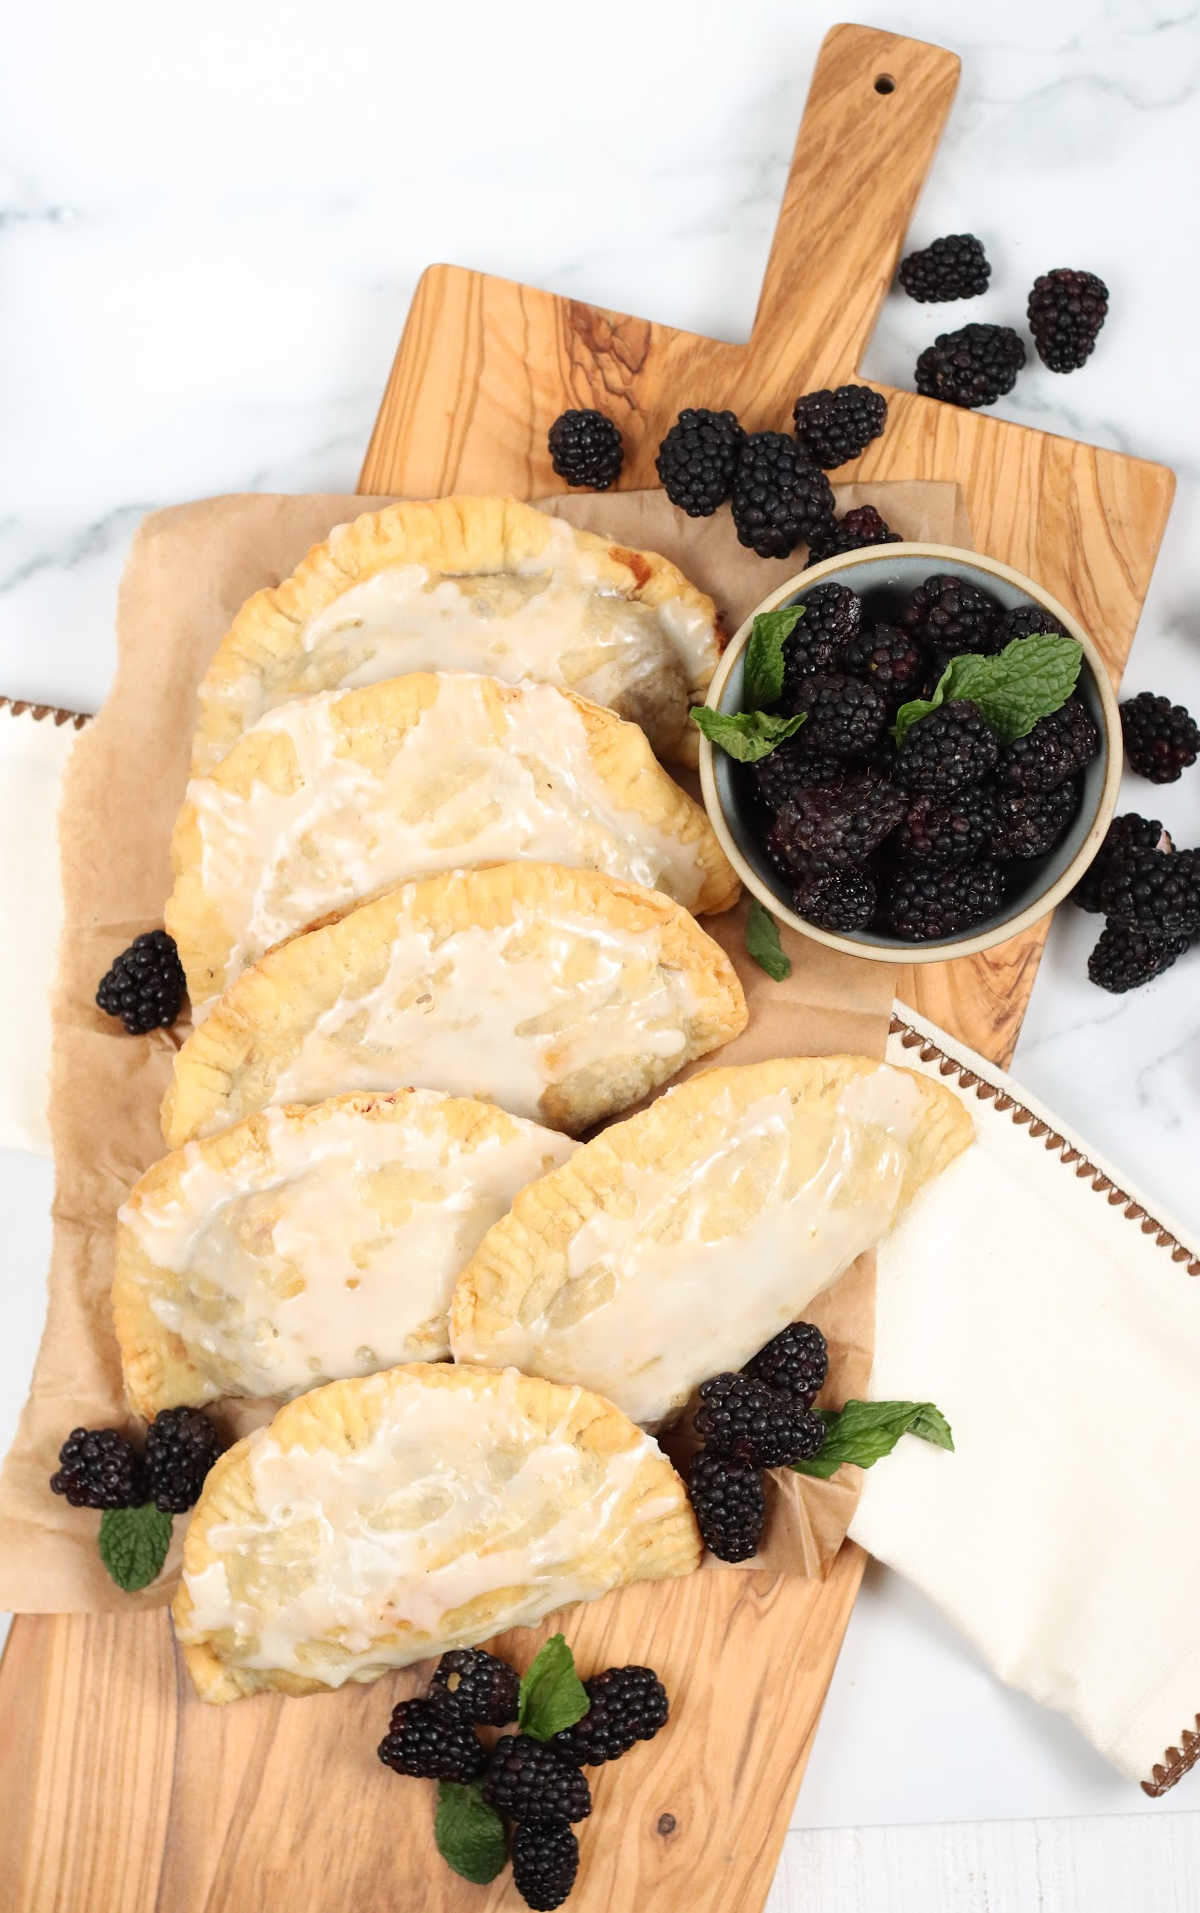 Blackberry hand pies with glaze on a wooden cutting board, loose berries around them.